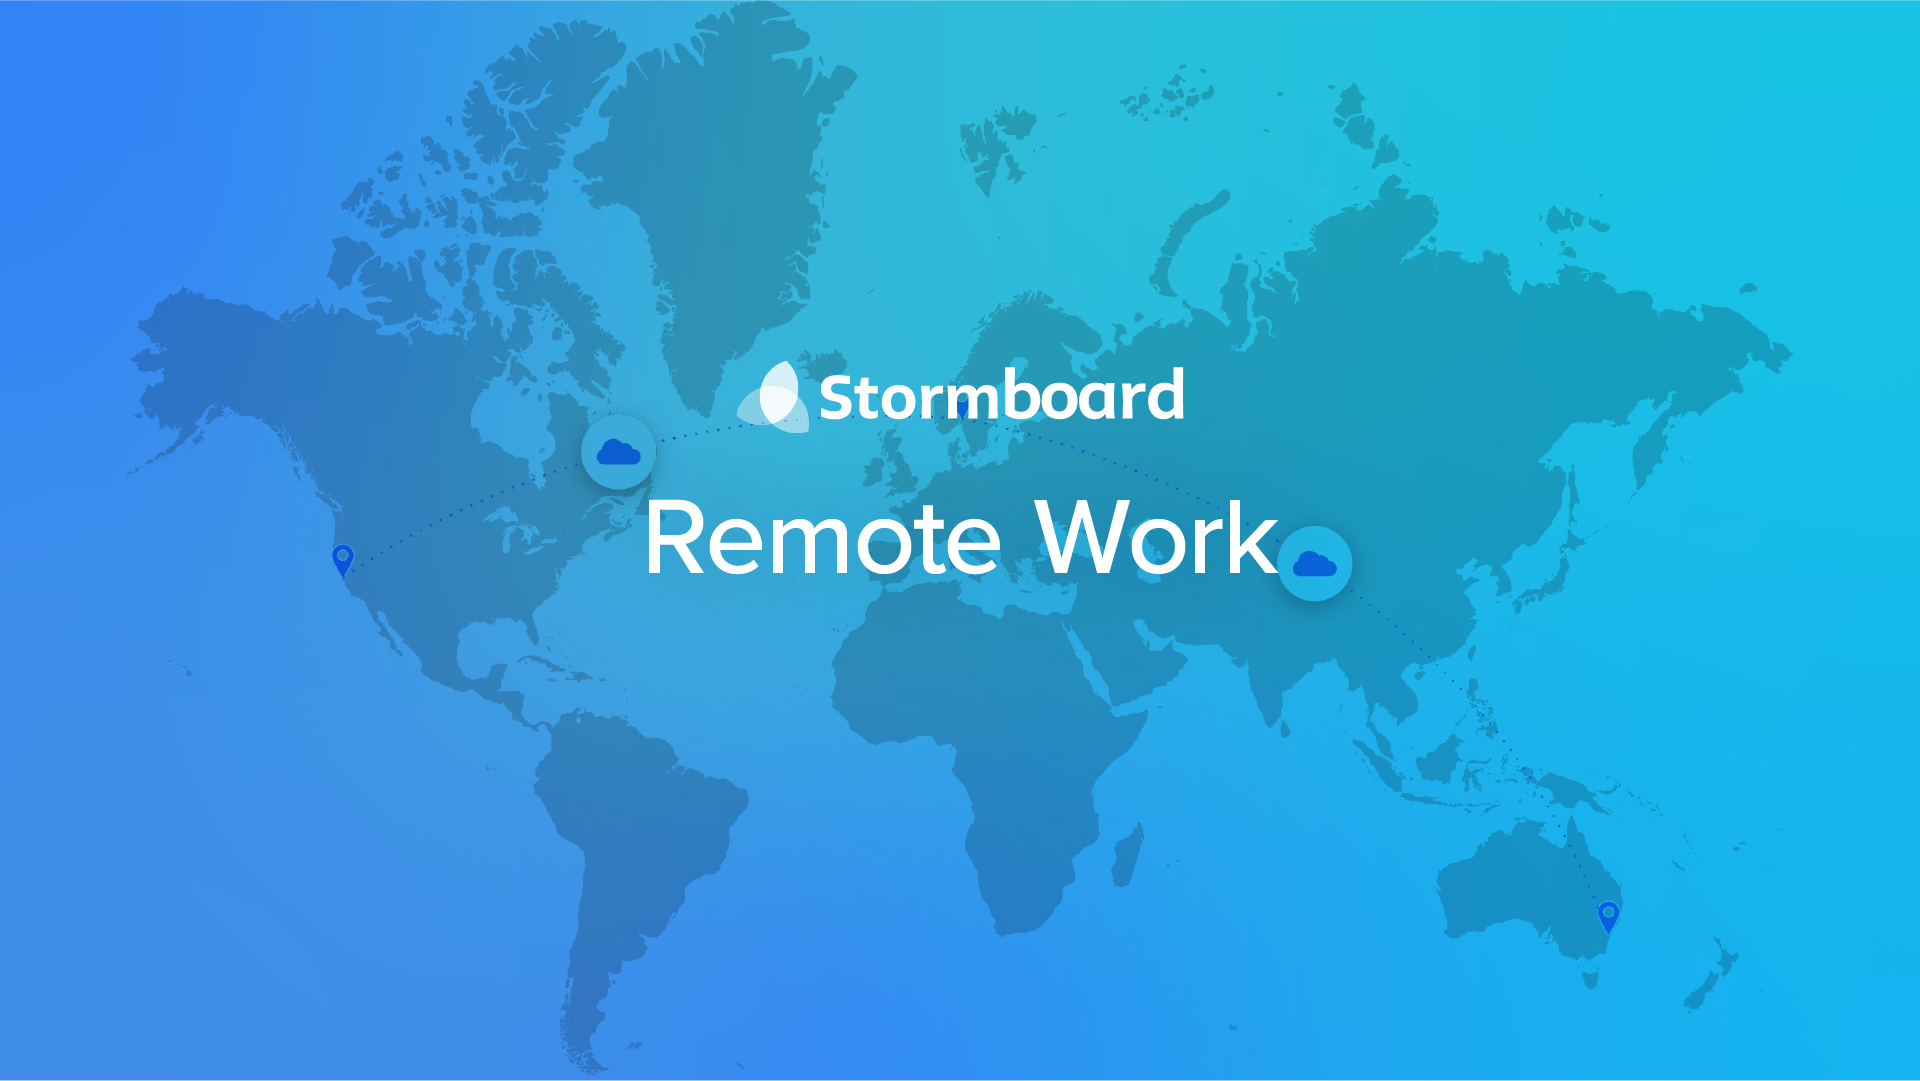 Stormboard for remote work overlaid on a blue map background